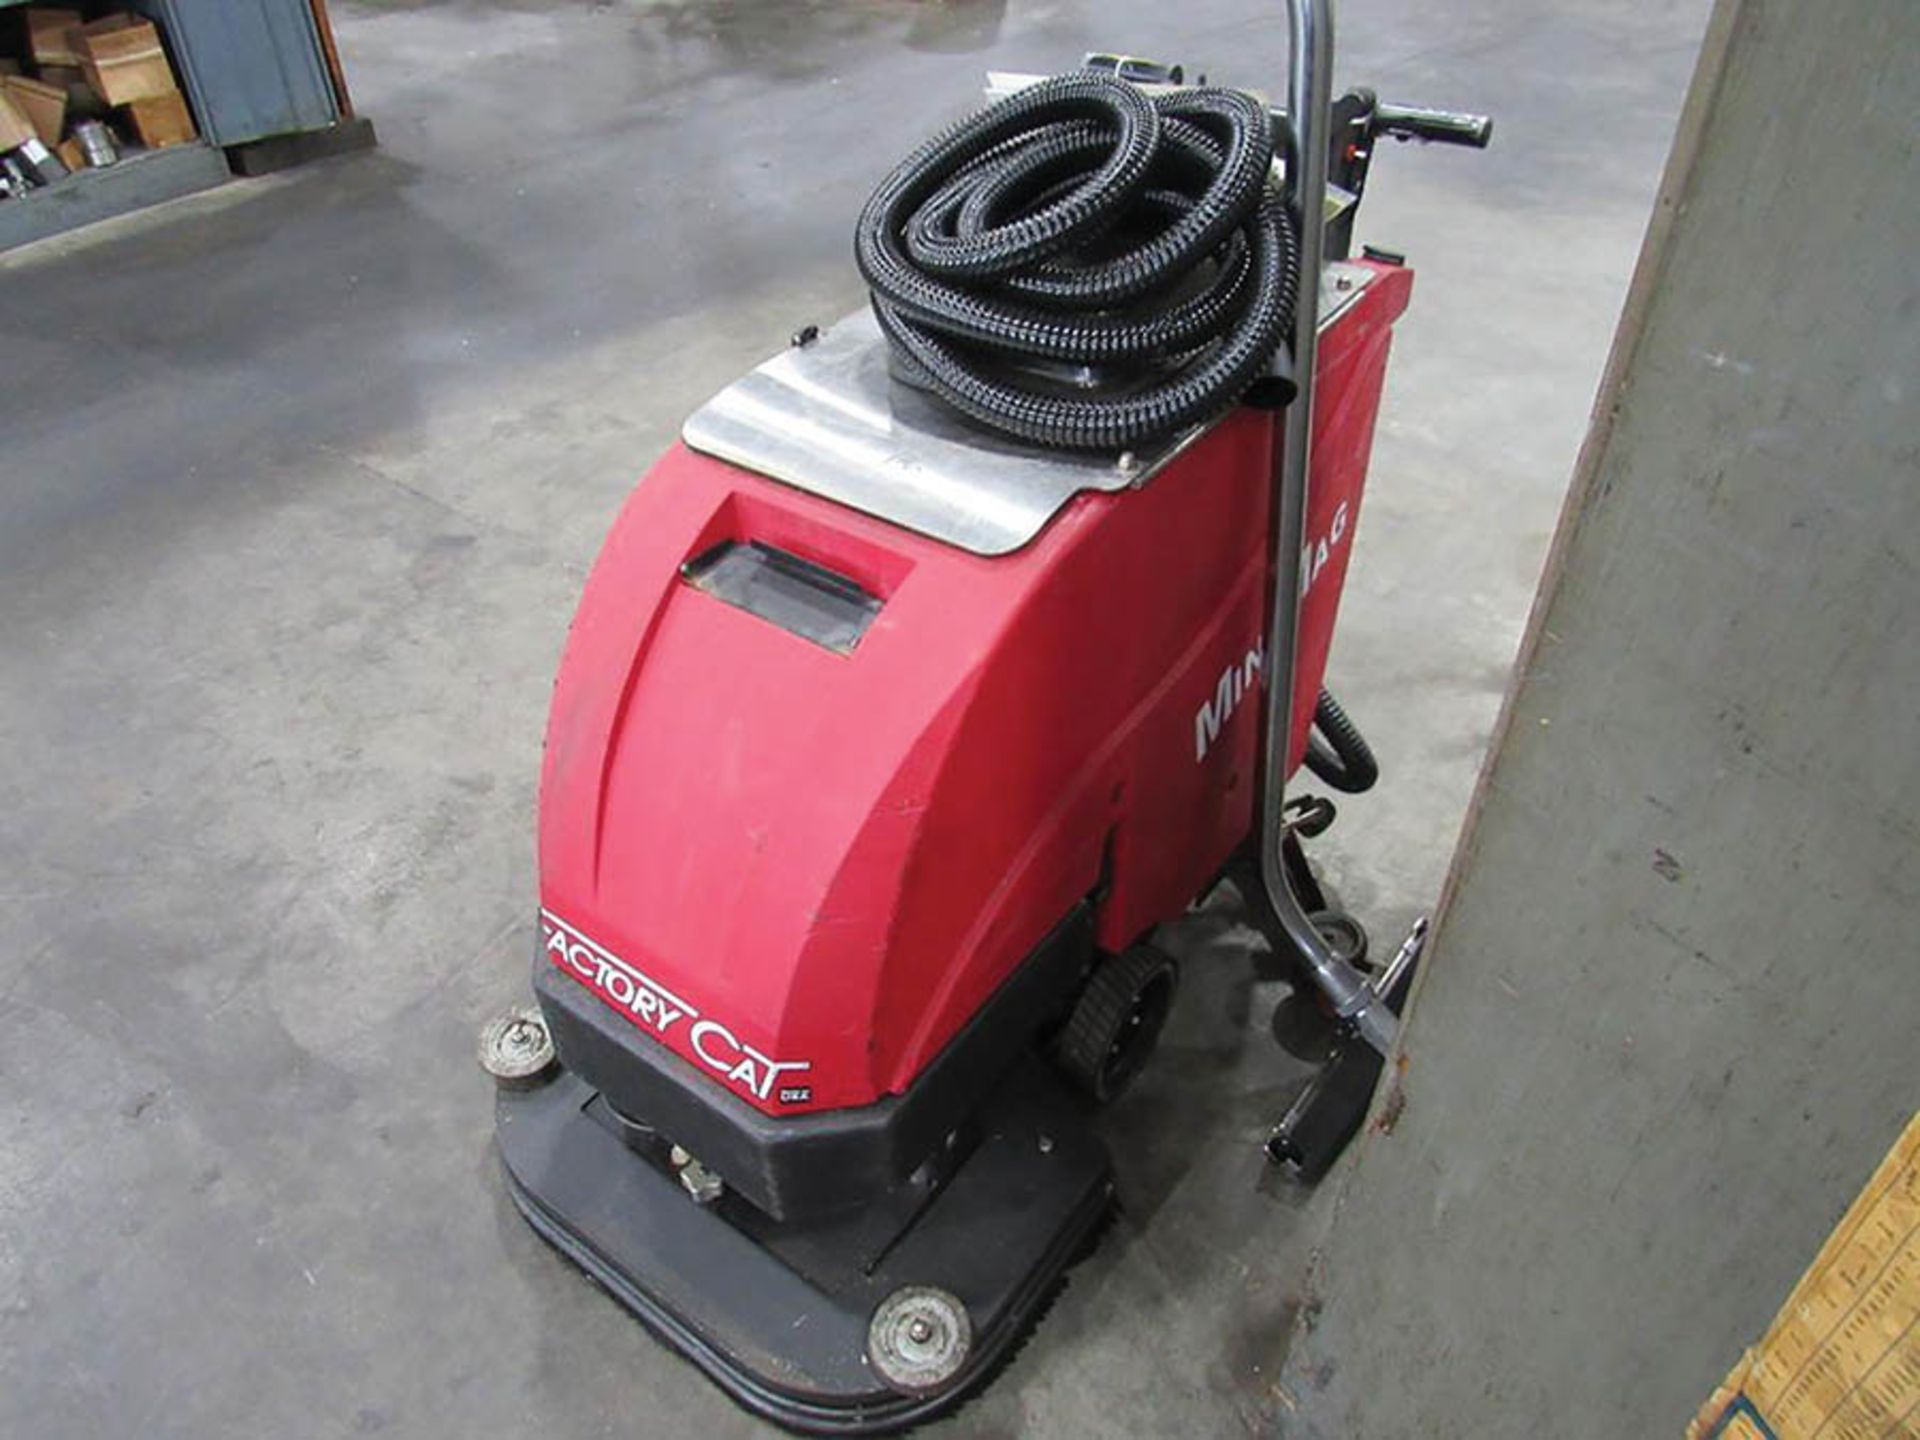 FACTORY CAT MINI-MAG ELECTRIC WALK-BEHIND FLOOR CLEANER W/ CHARGER, 1,018 HOURS, S/N 47718 - Image 2 of 4